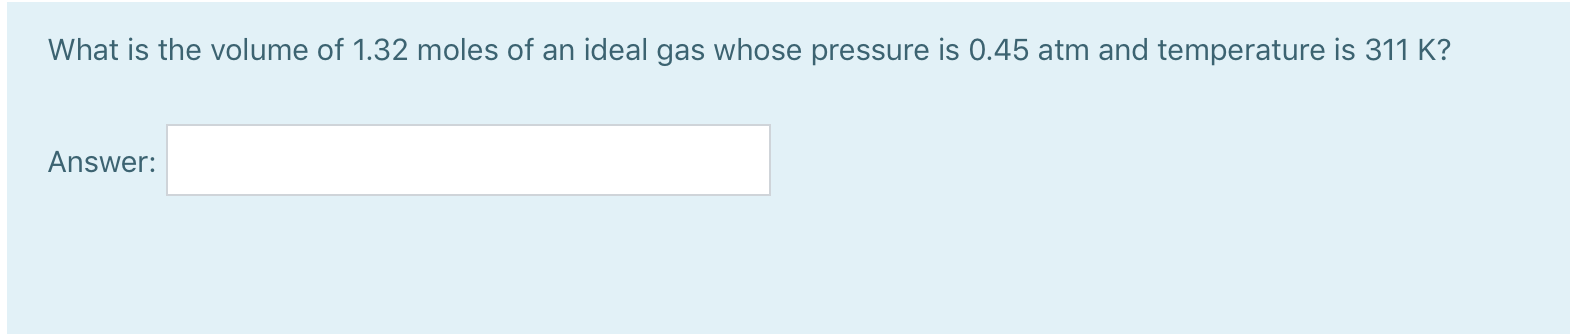 What is the volume of 1.32 moles of an ideal gas whose pressure is 0.45 atm and temperature is 311 K?
Answer:
